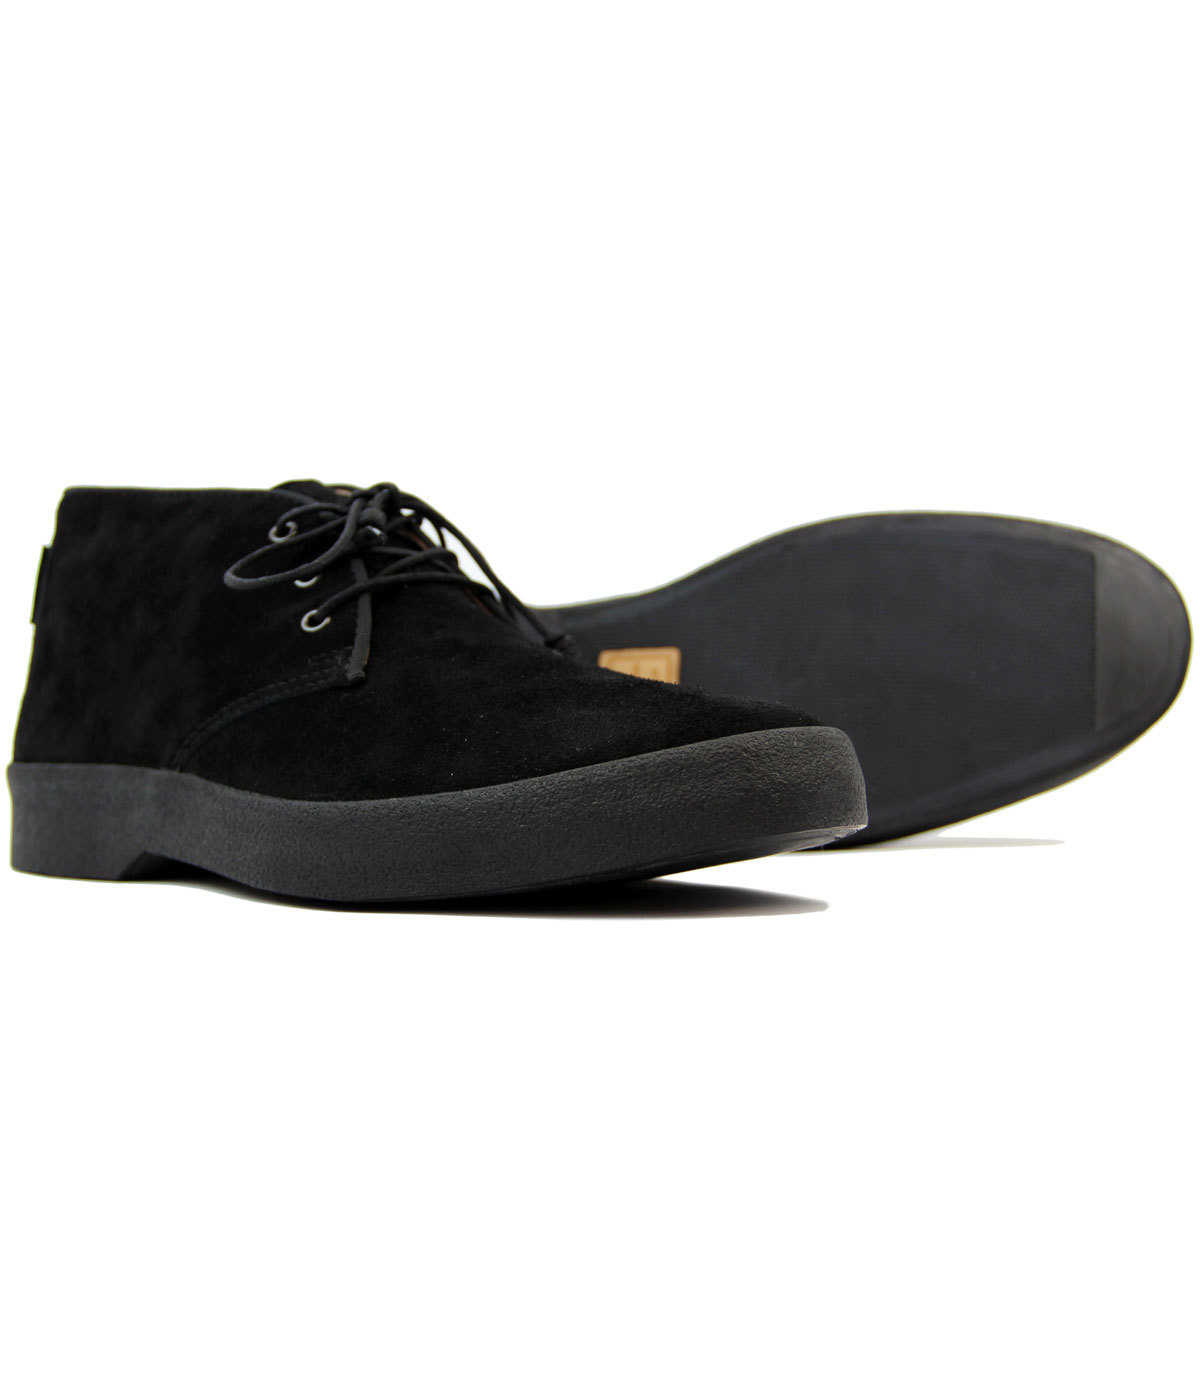 BASS WEEJUNS Scholar Stanford Mod Mid Suede Playboy Boots Black